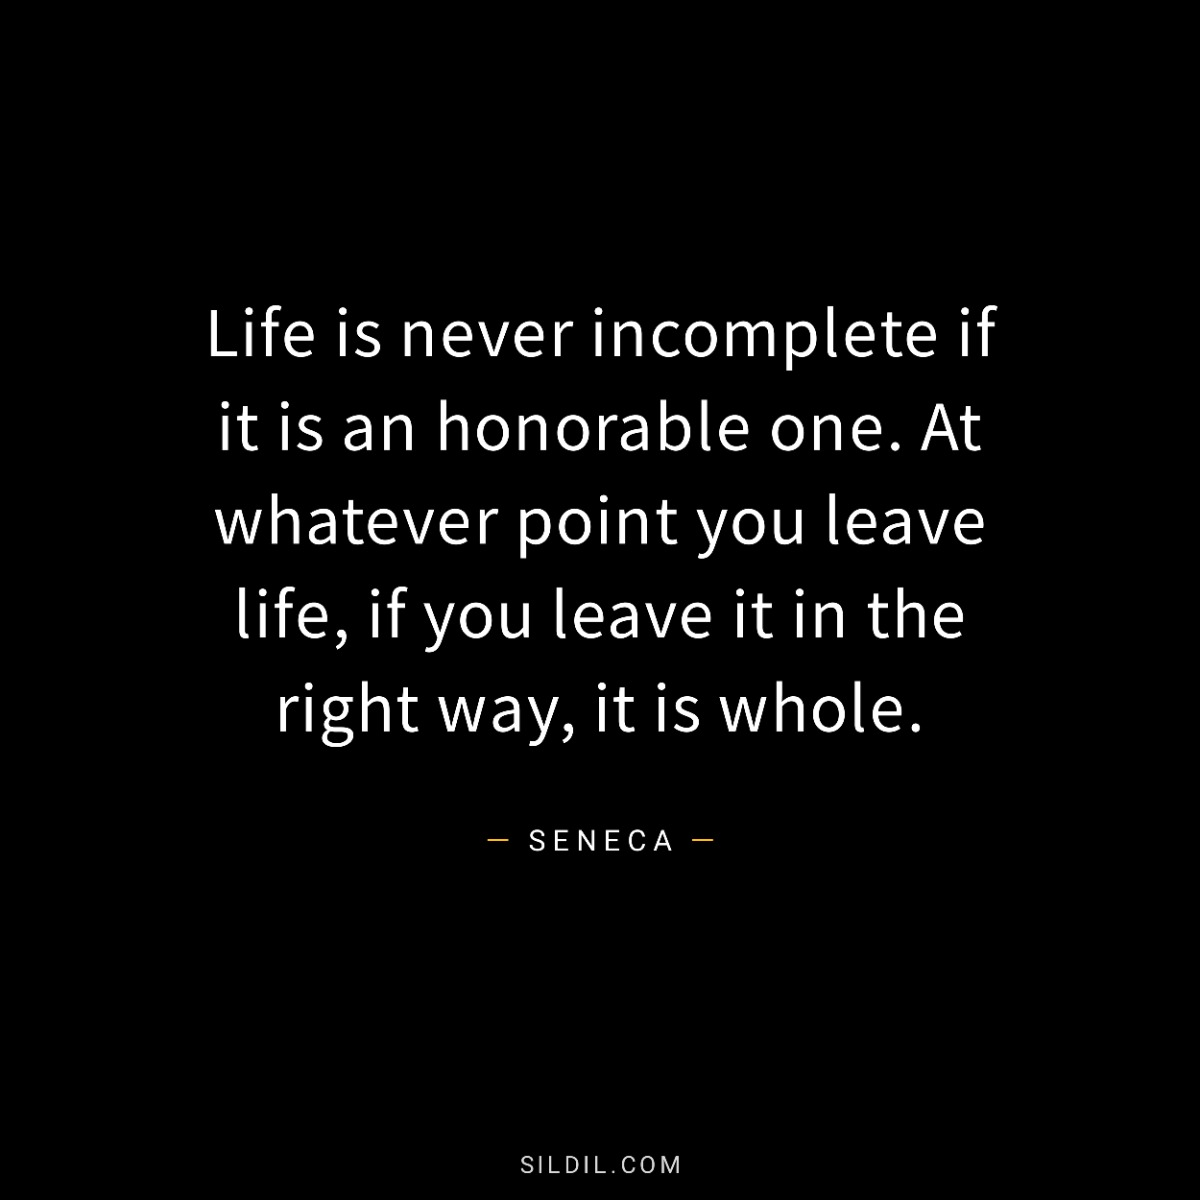 Life is never incomplete if it is an honorable one. At whatever point you leave life, if you leave it in the right way, it is whole.